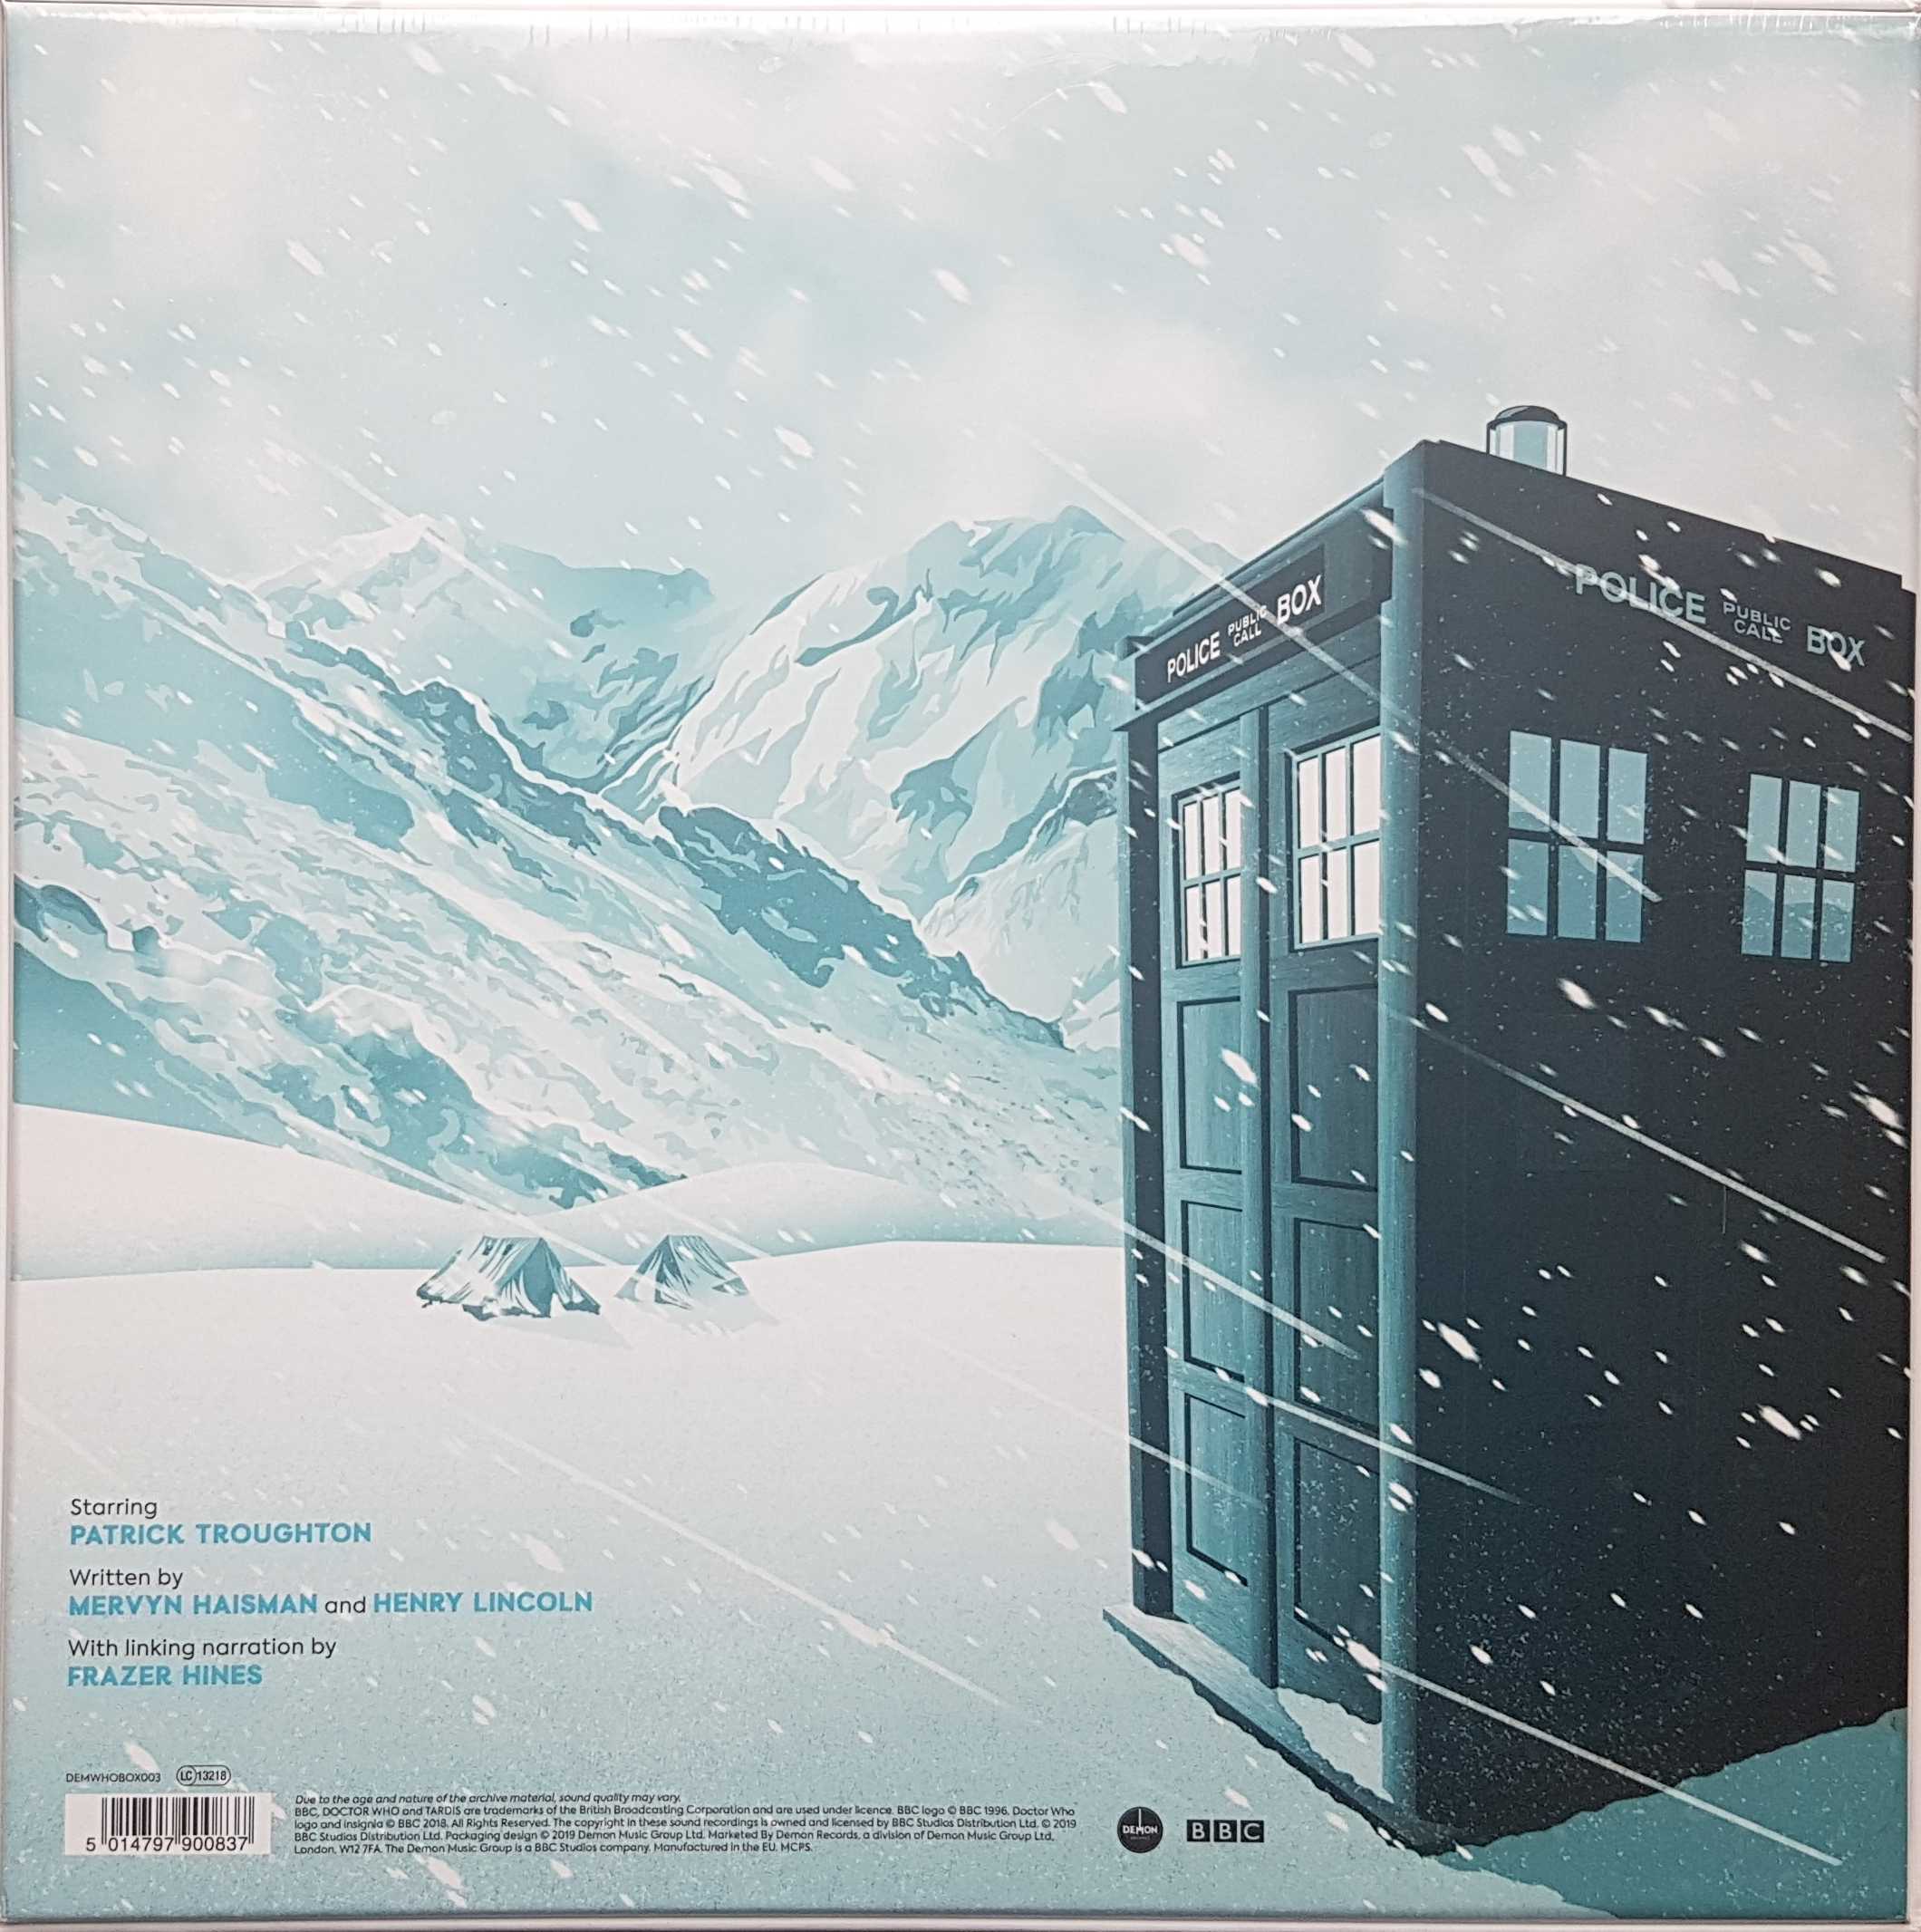 Picture of DEMWHOBOX003X Doctor Who - The abominable snowmen by artist Mervyn Haisman / Henry Lincoln from the BBC records and Tapes library